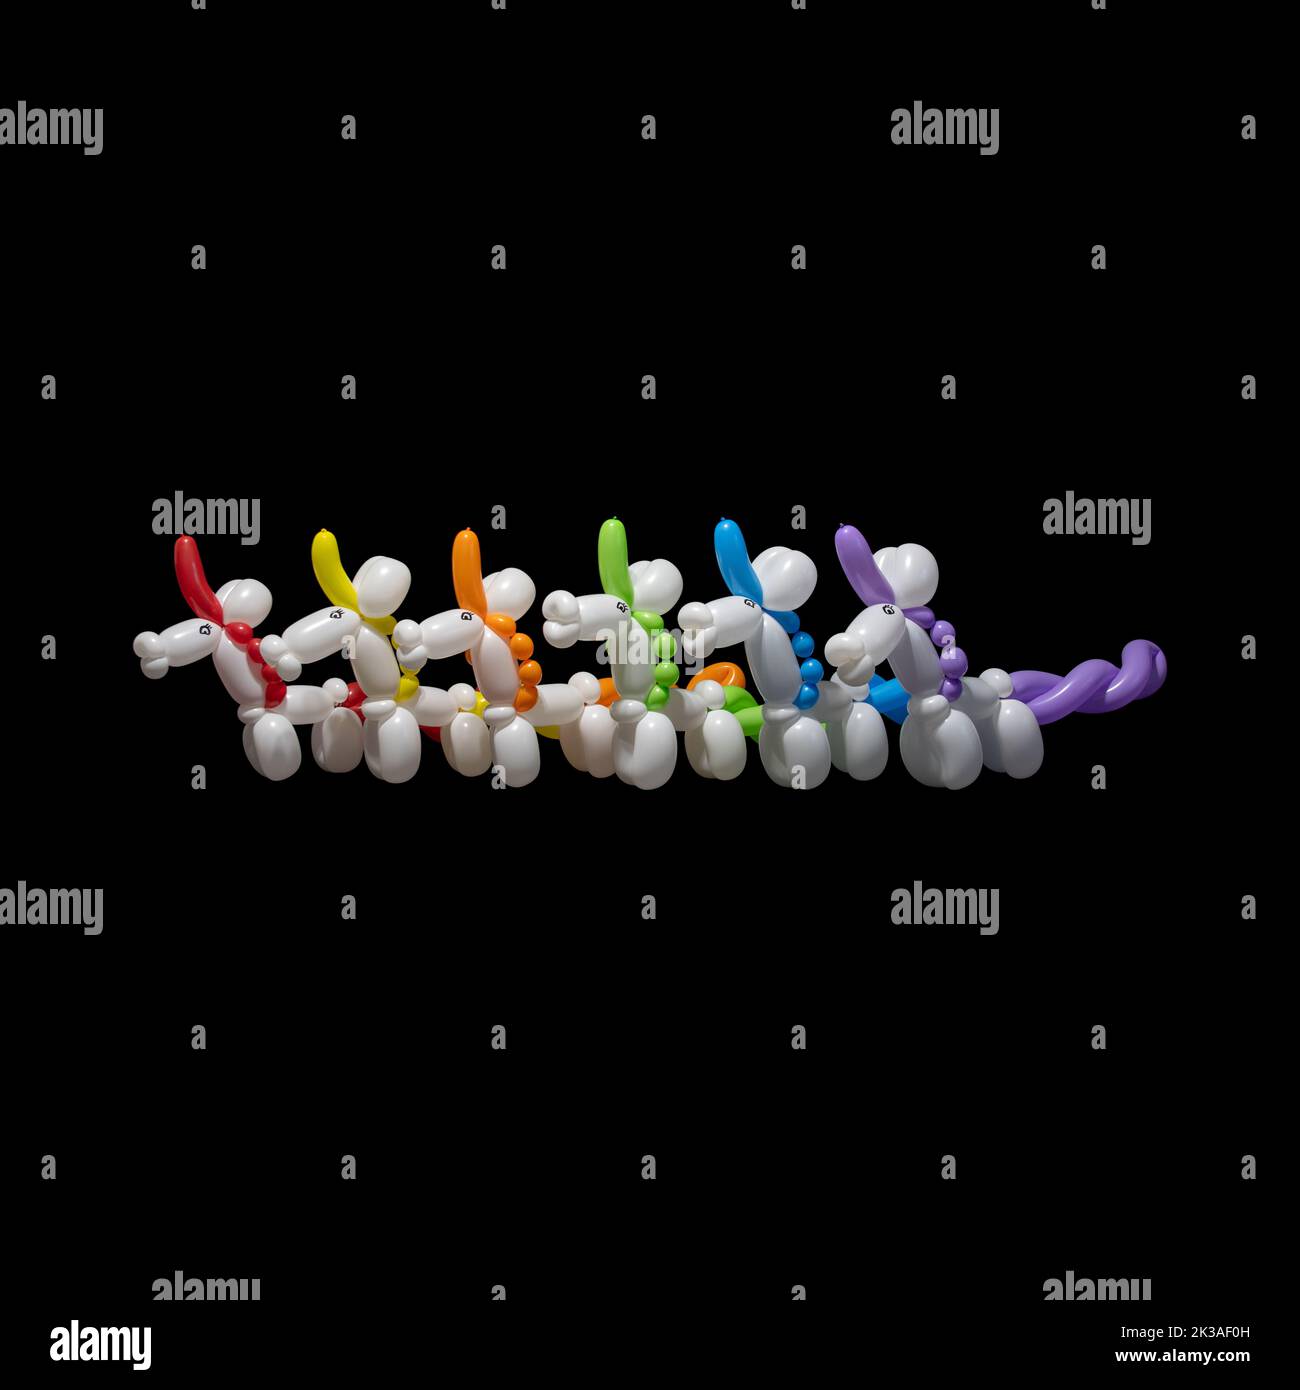 A row of cute white unicorn balloon animals with a rainbow of colorful manes, tails, and horns like a clown or entertainer might make at a birthday pa Stock Photo